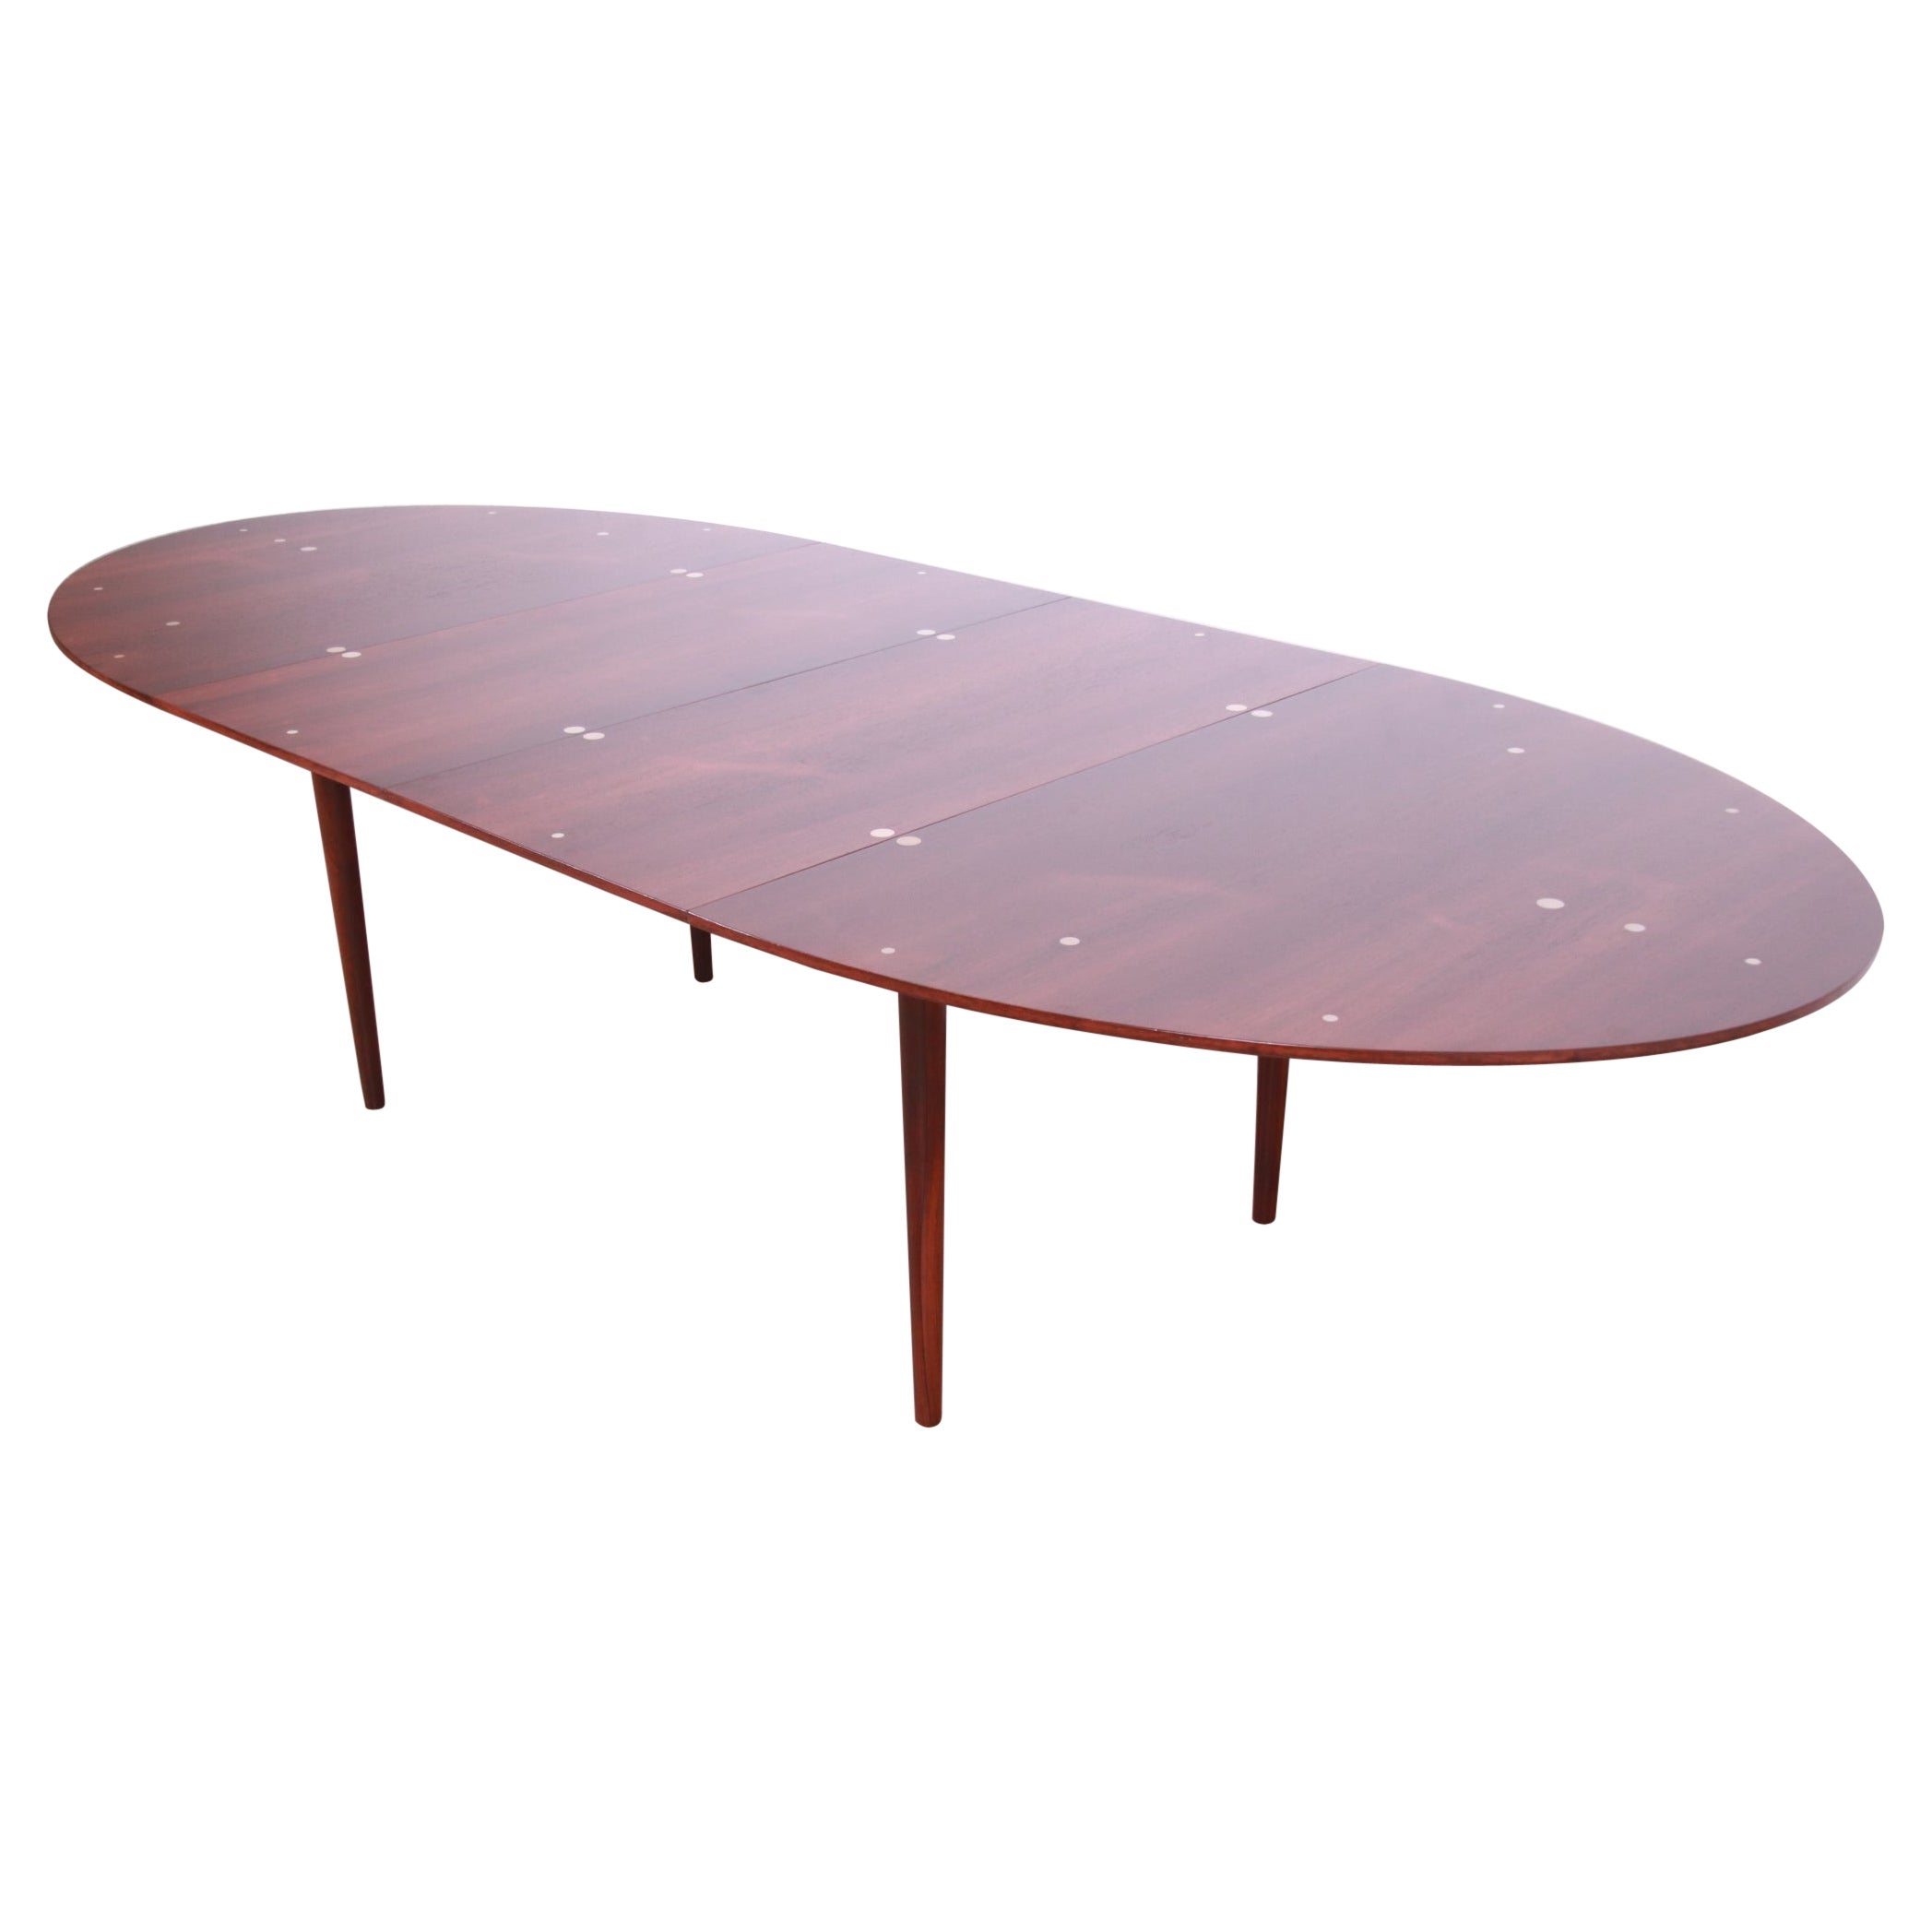 Outstanding Finn Juhl Rosewood and Silver Inlay "Judas" Dining Table, Restored